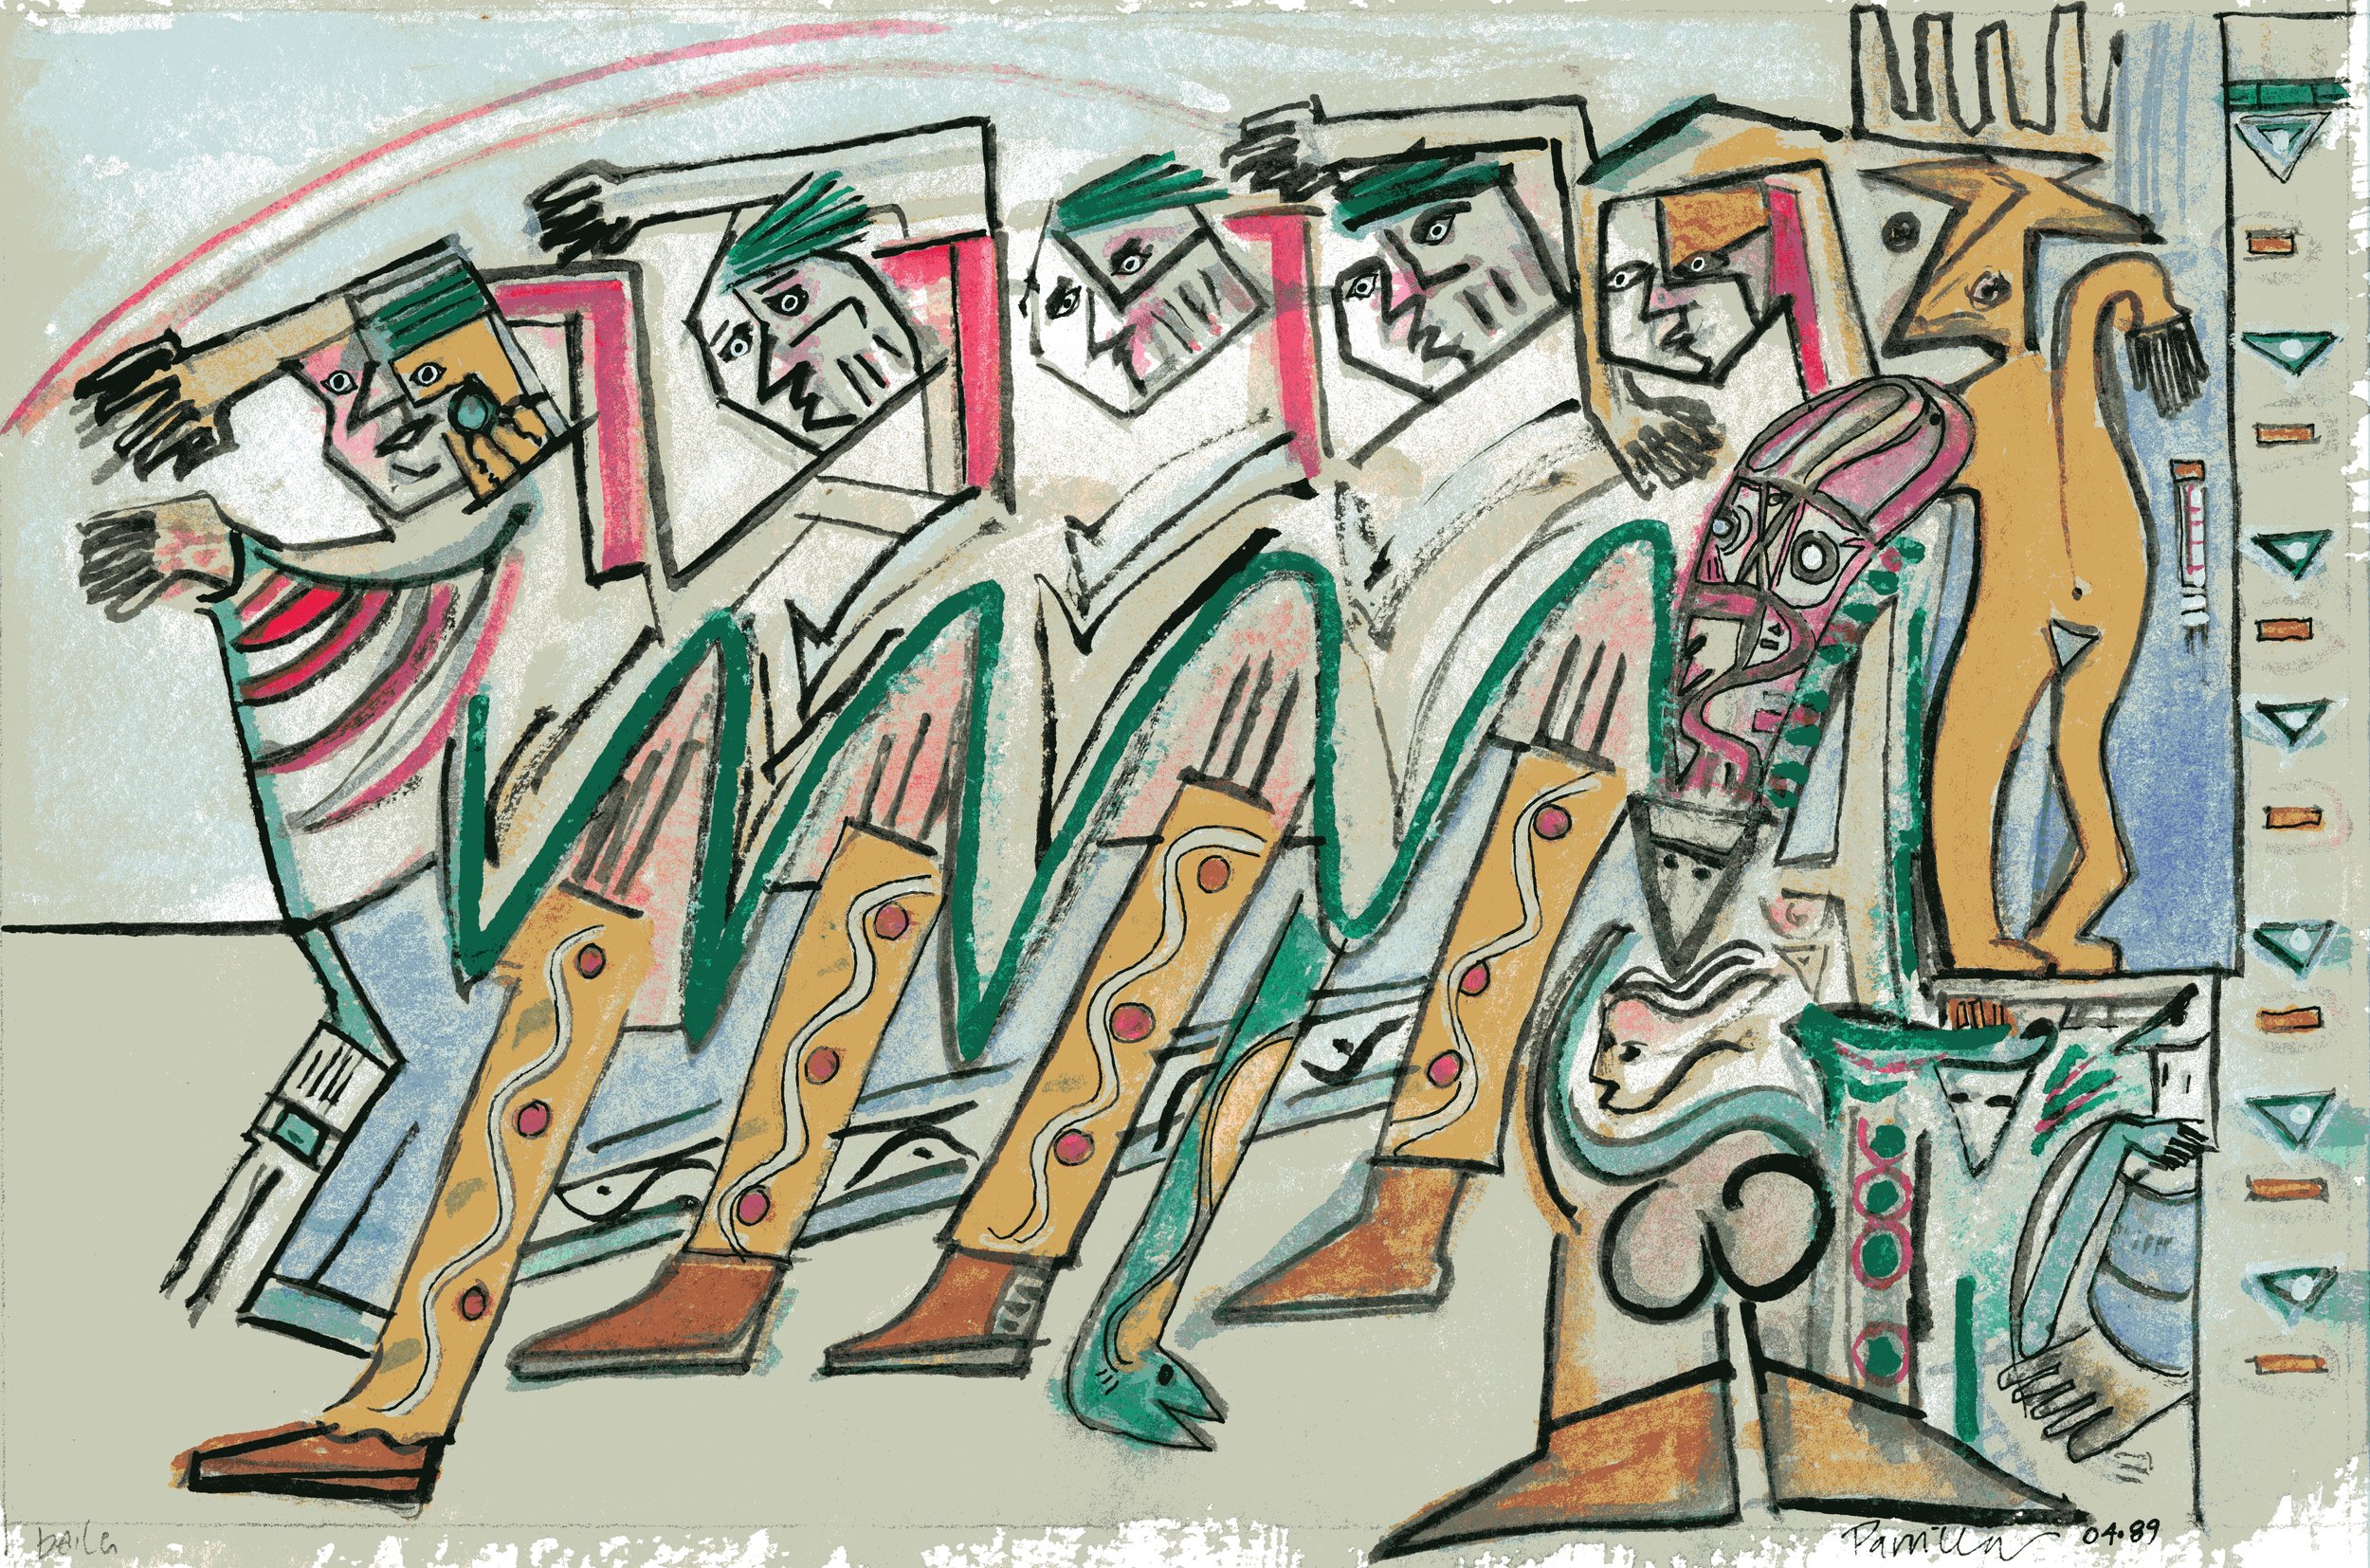 Baile 1989, 9X12 inches, gouache on paper